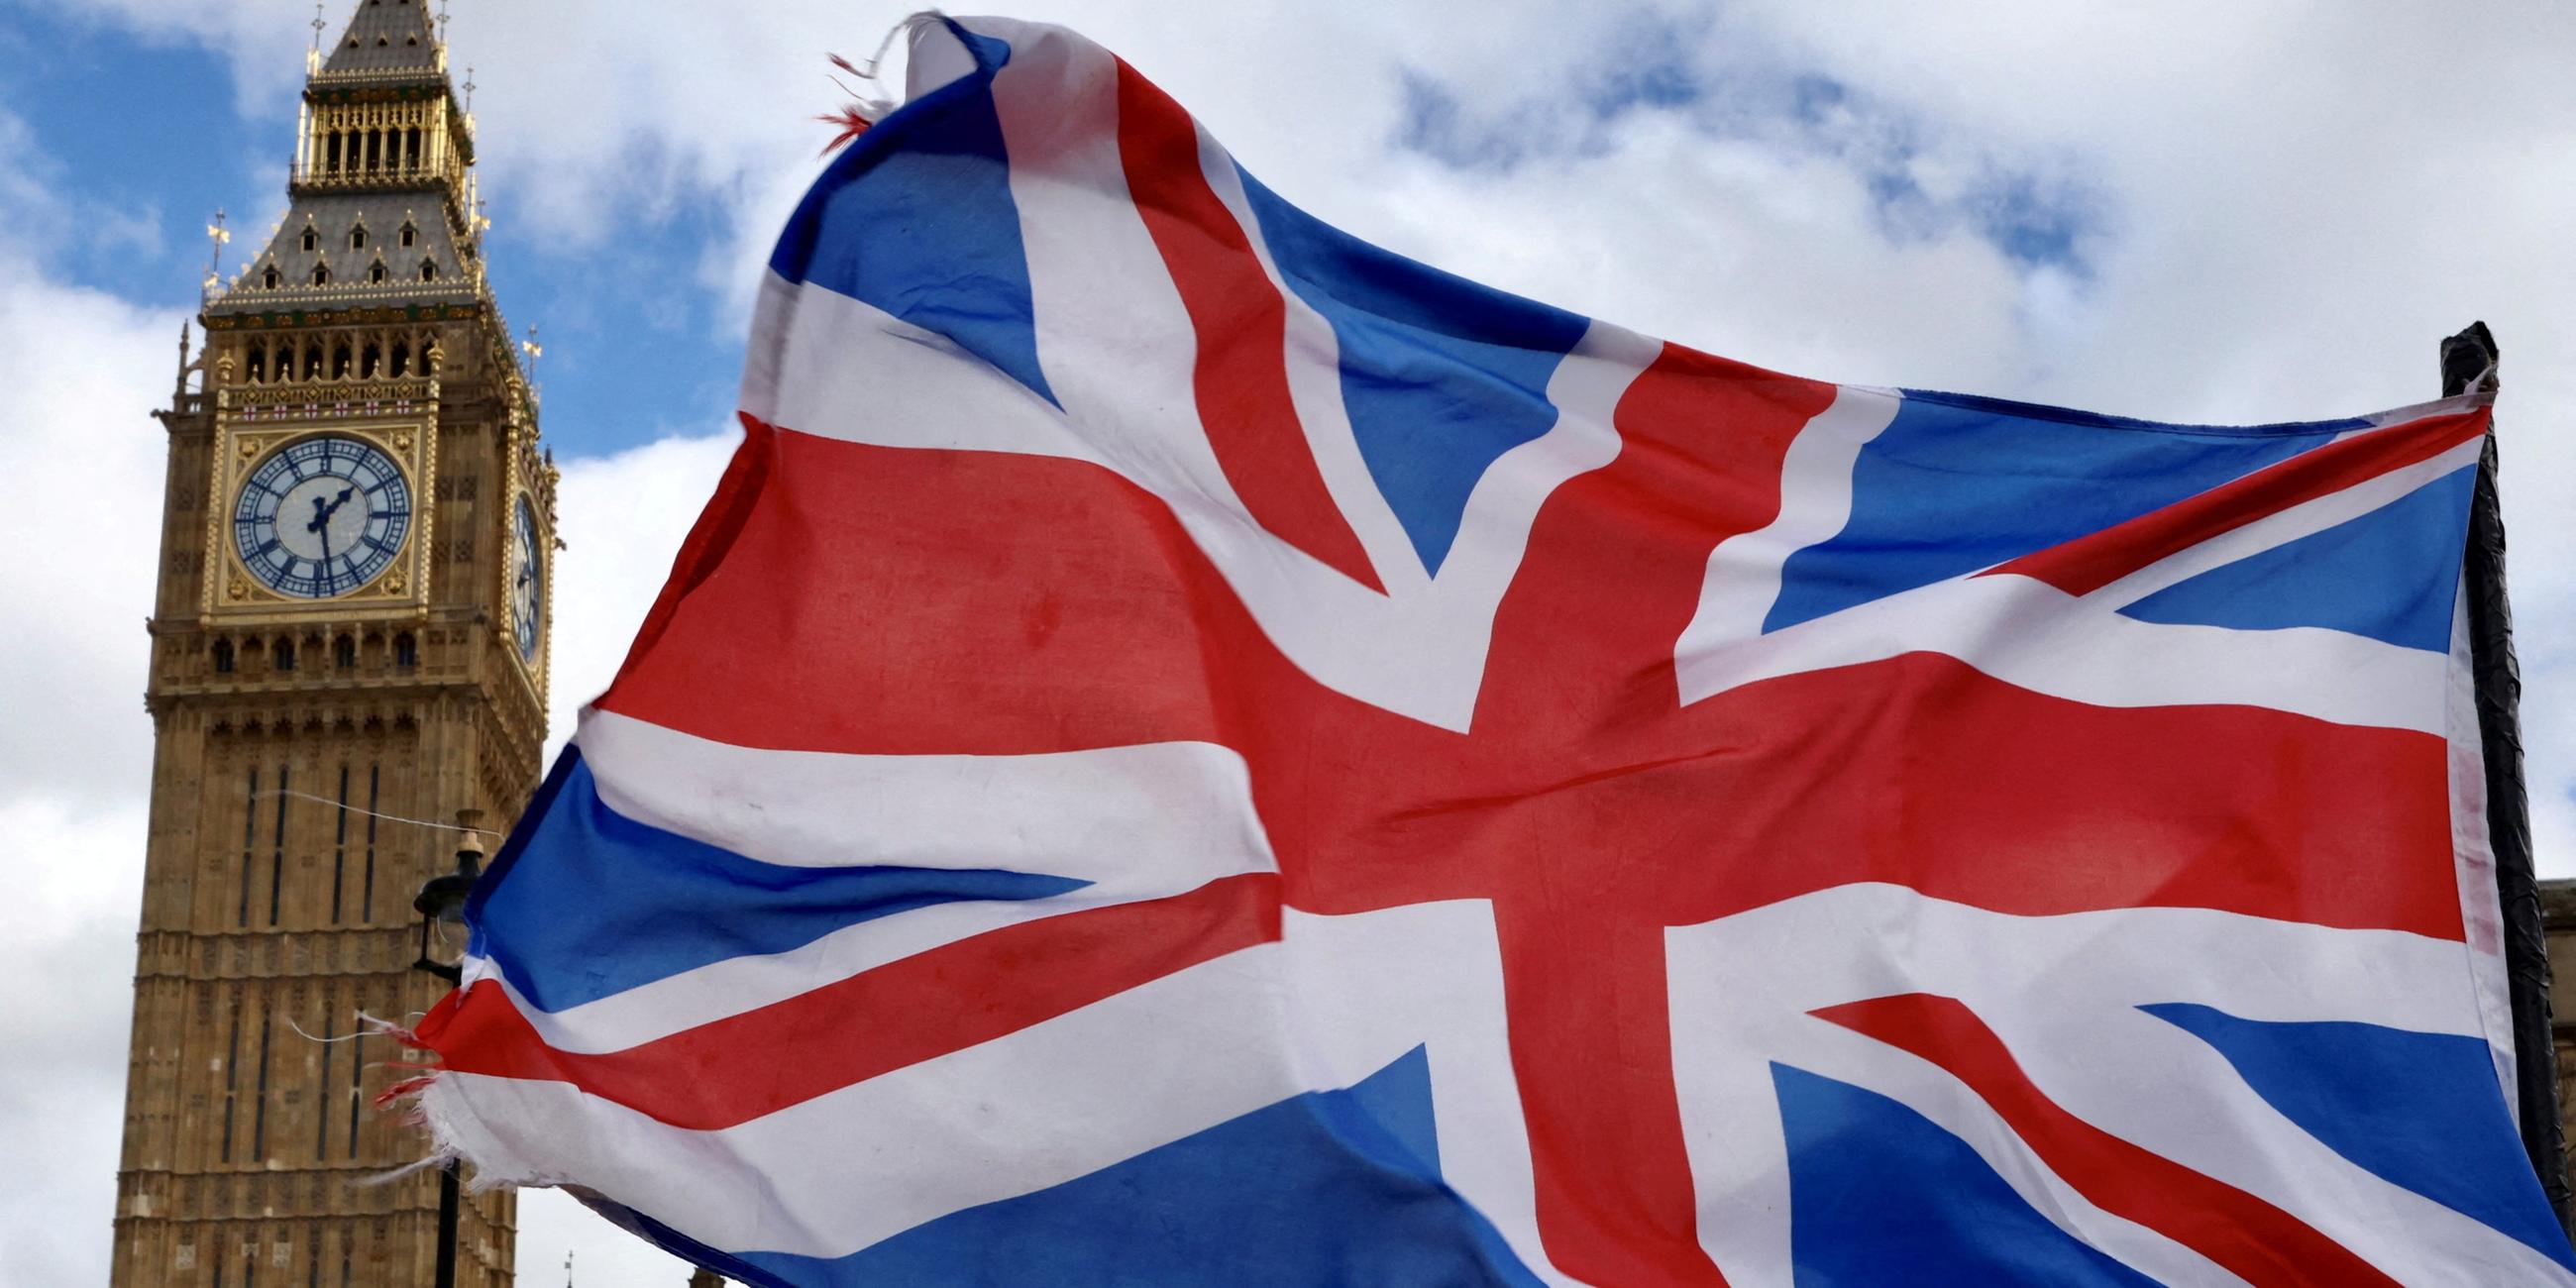 FILE PHOTO: A Union Jack flag flutters in the wind near Big Ben and Parliament in Parliament Square in London